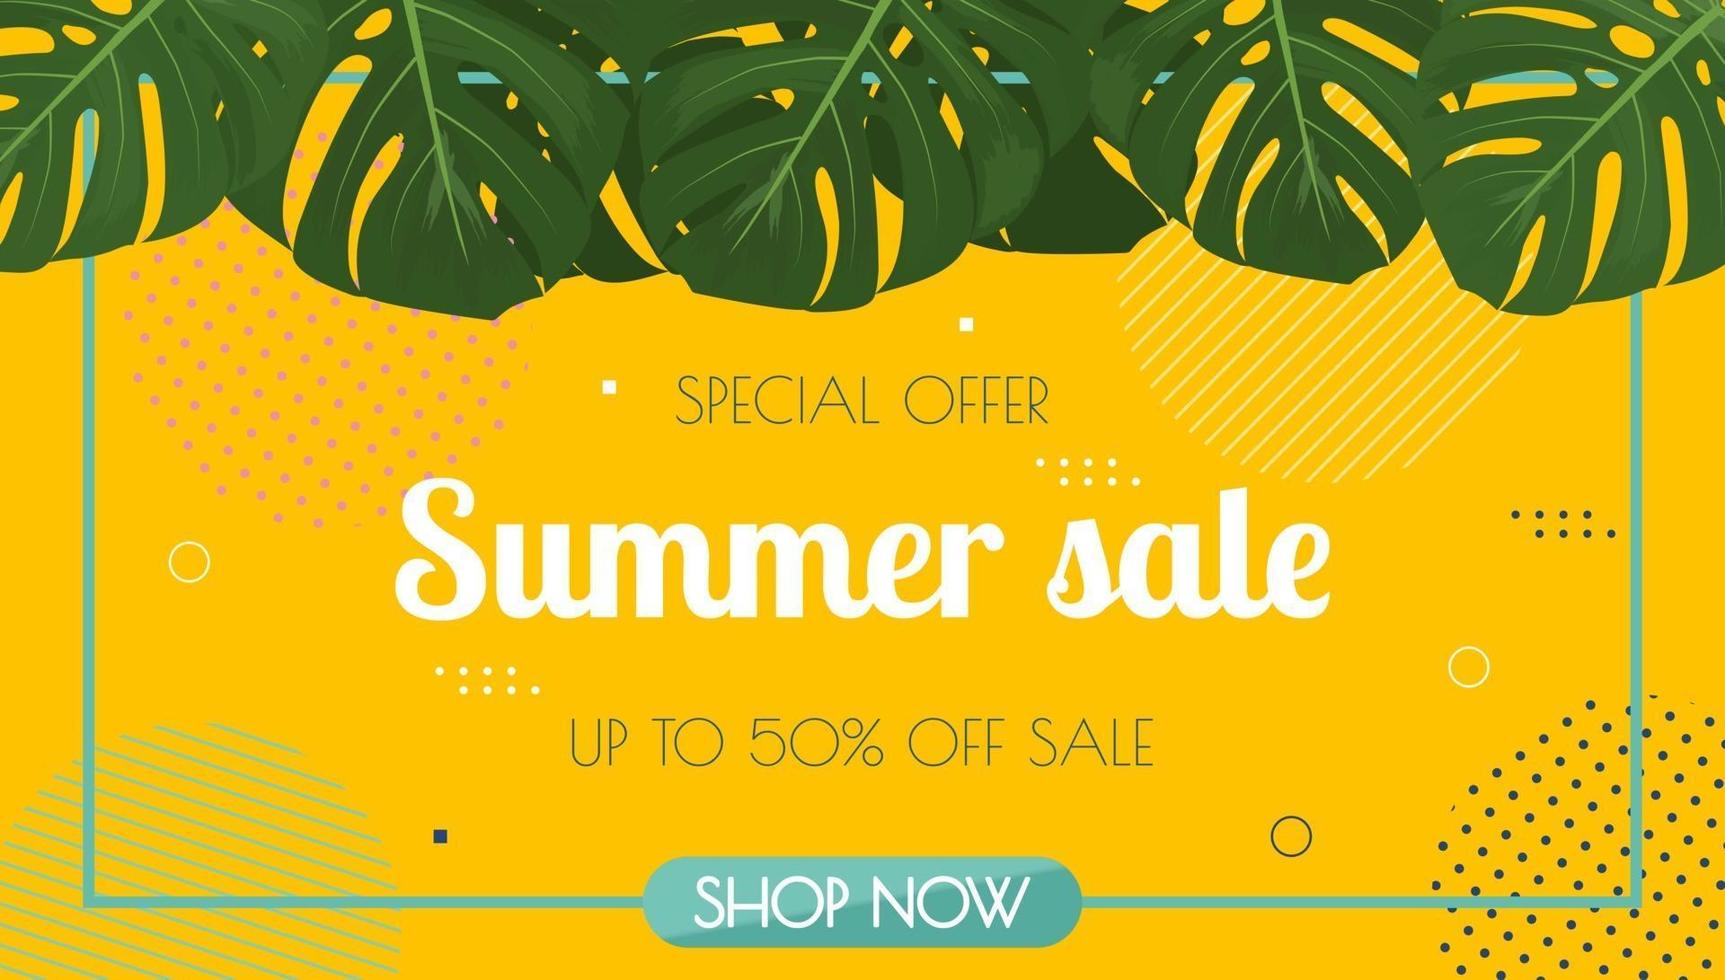 Summer sale horizontal banner with abstract geometric shapes and tropical leaves. Vector illustration in flat style